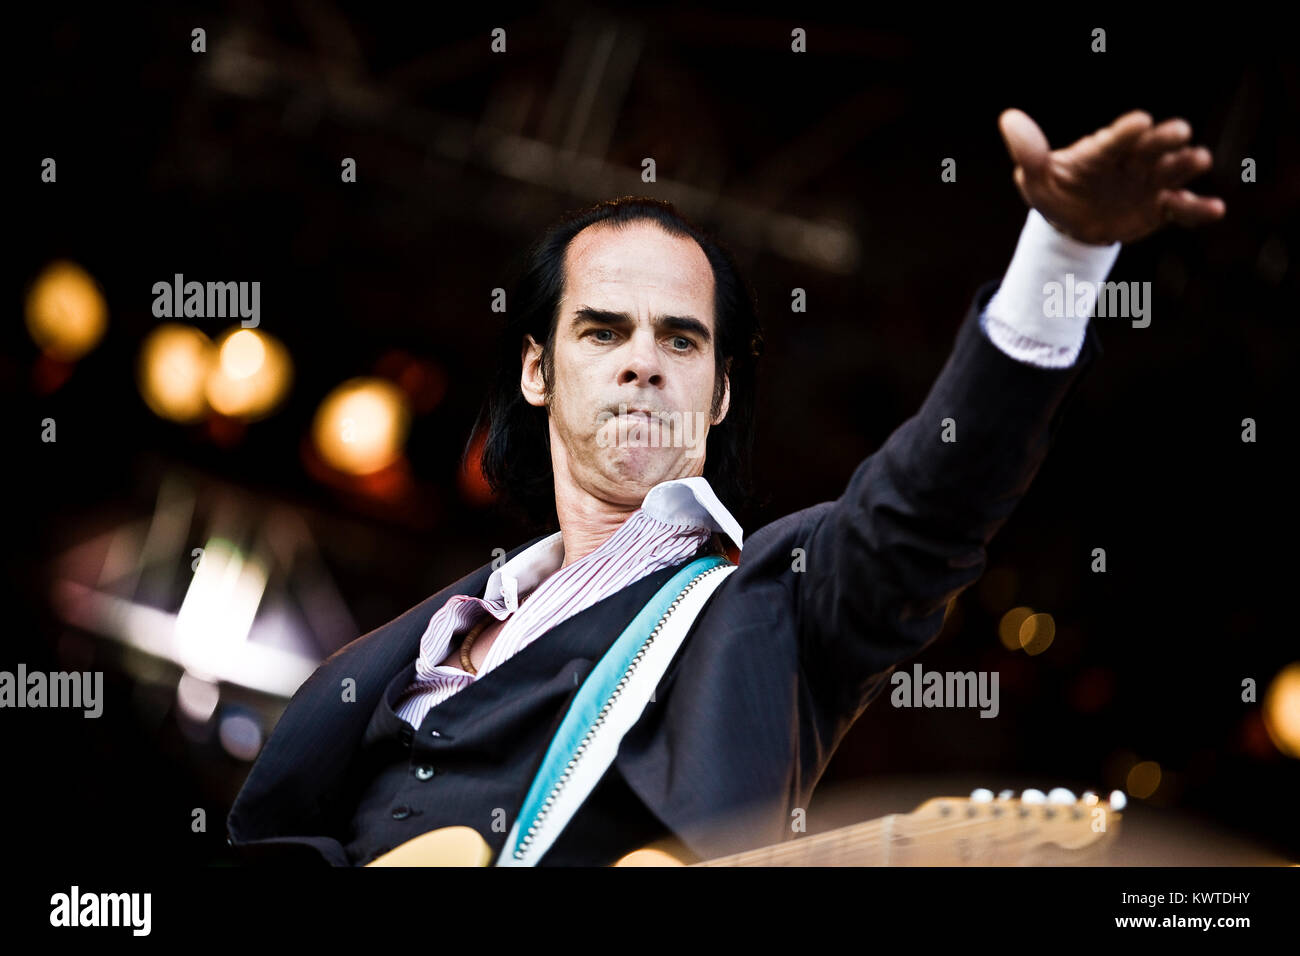 The Australian musician, composer, author and singer Nick Cave is here pictured at a live concert with his band The Bad Seeds at Roskilde Festival 2009. Denmark 03/07 2009. Stock Photo